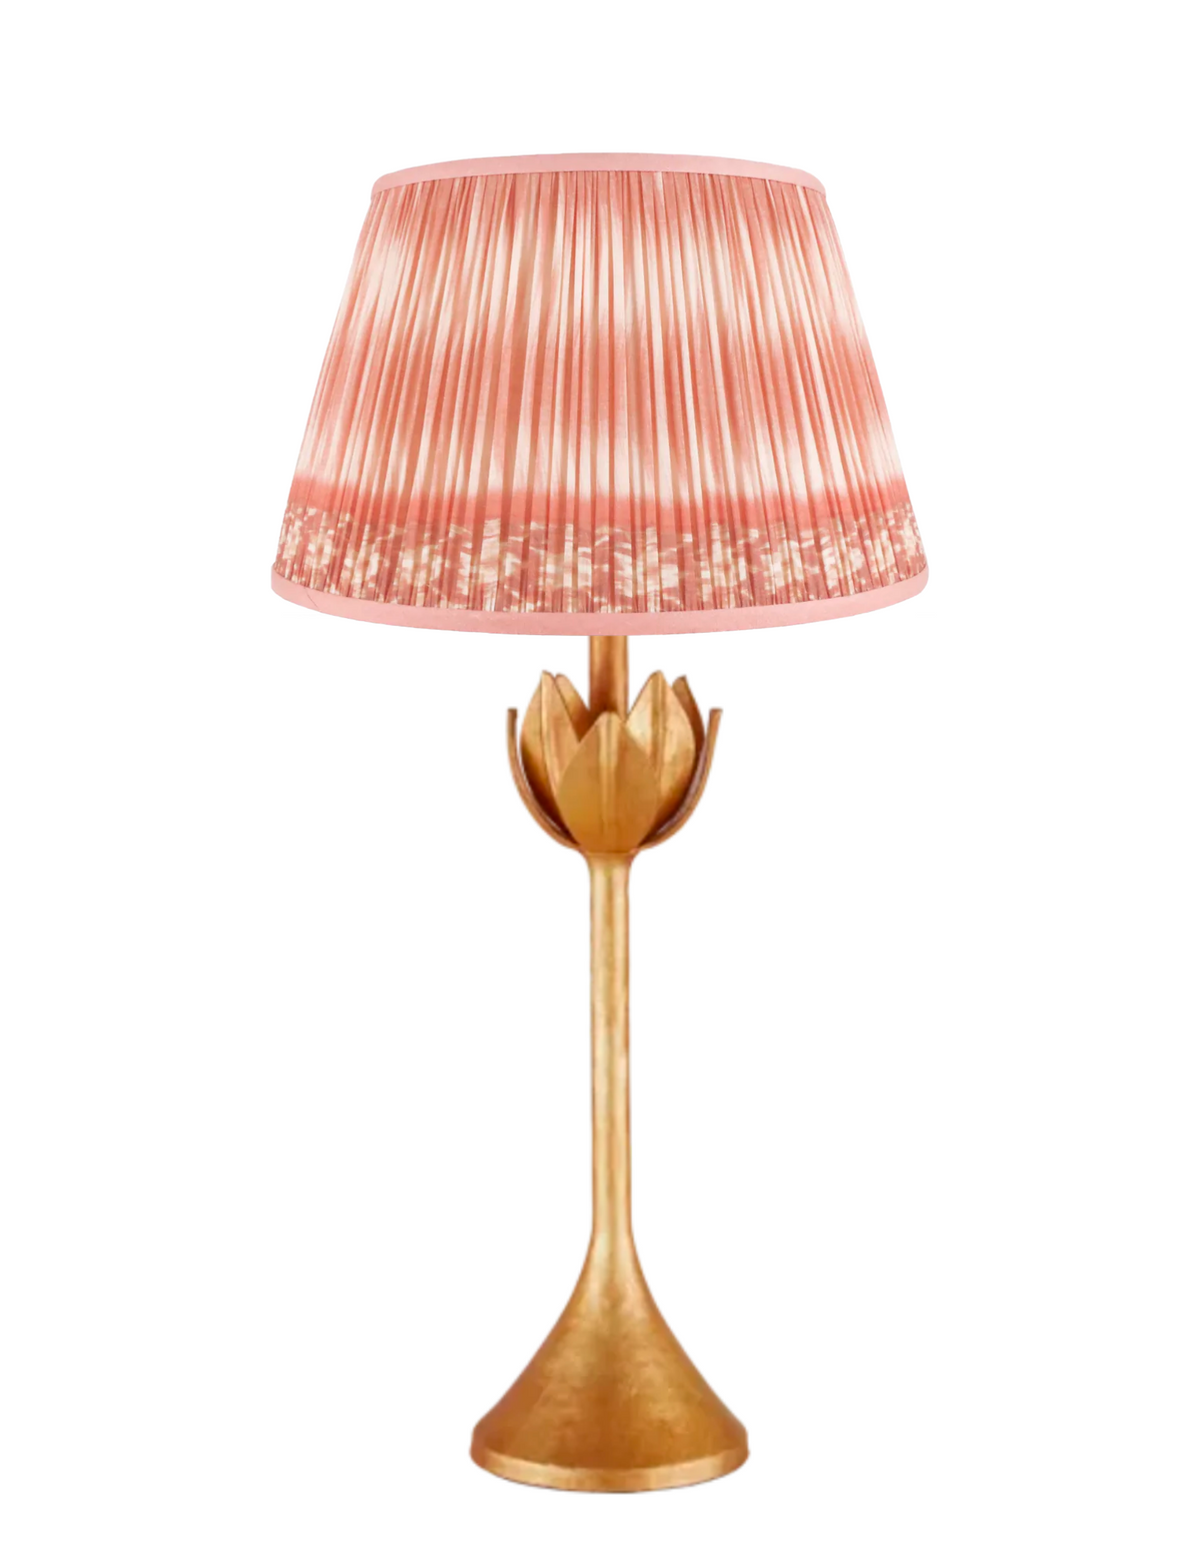 Ikat Shade in Coral